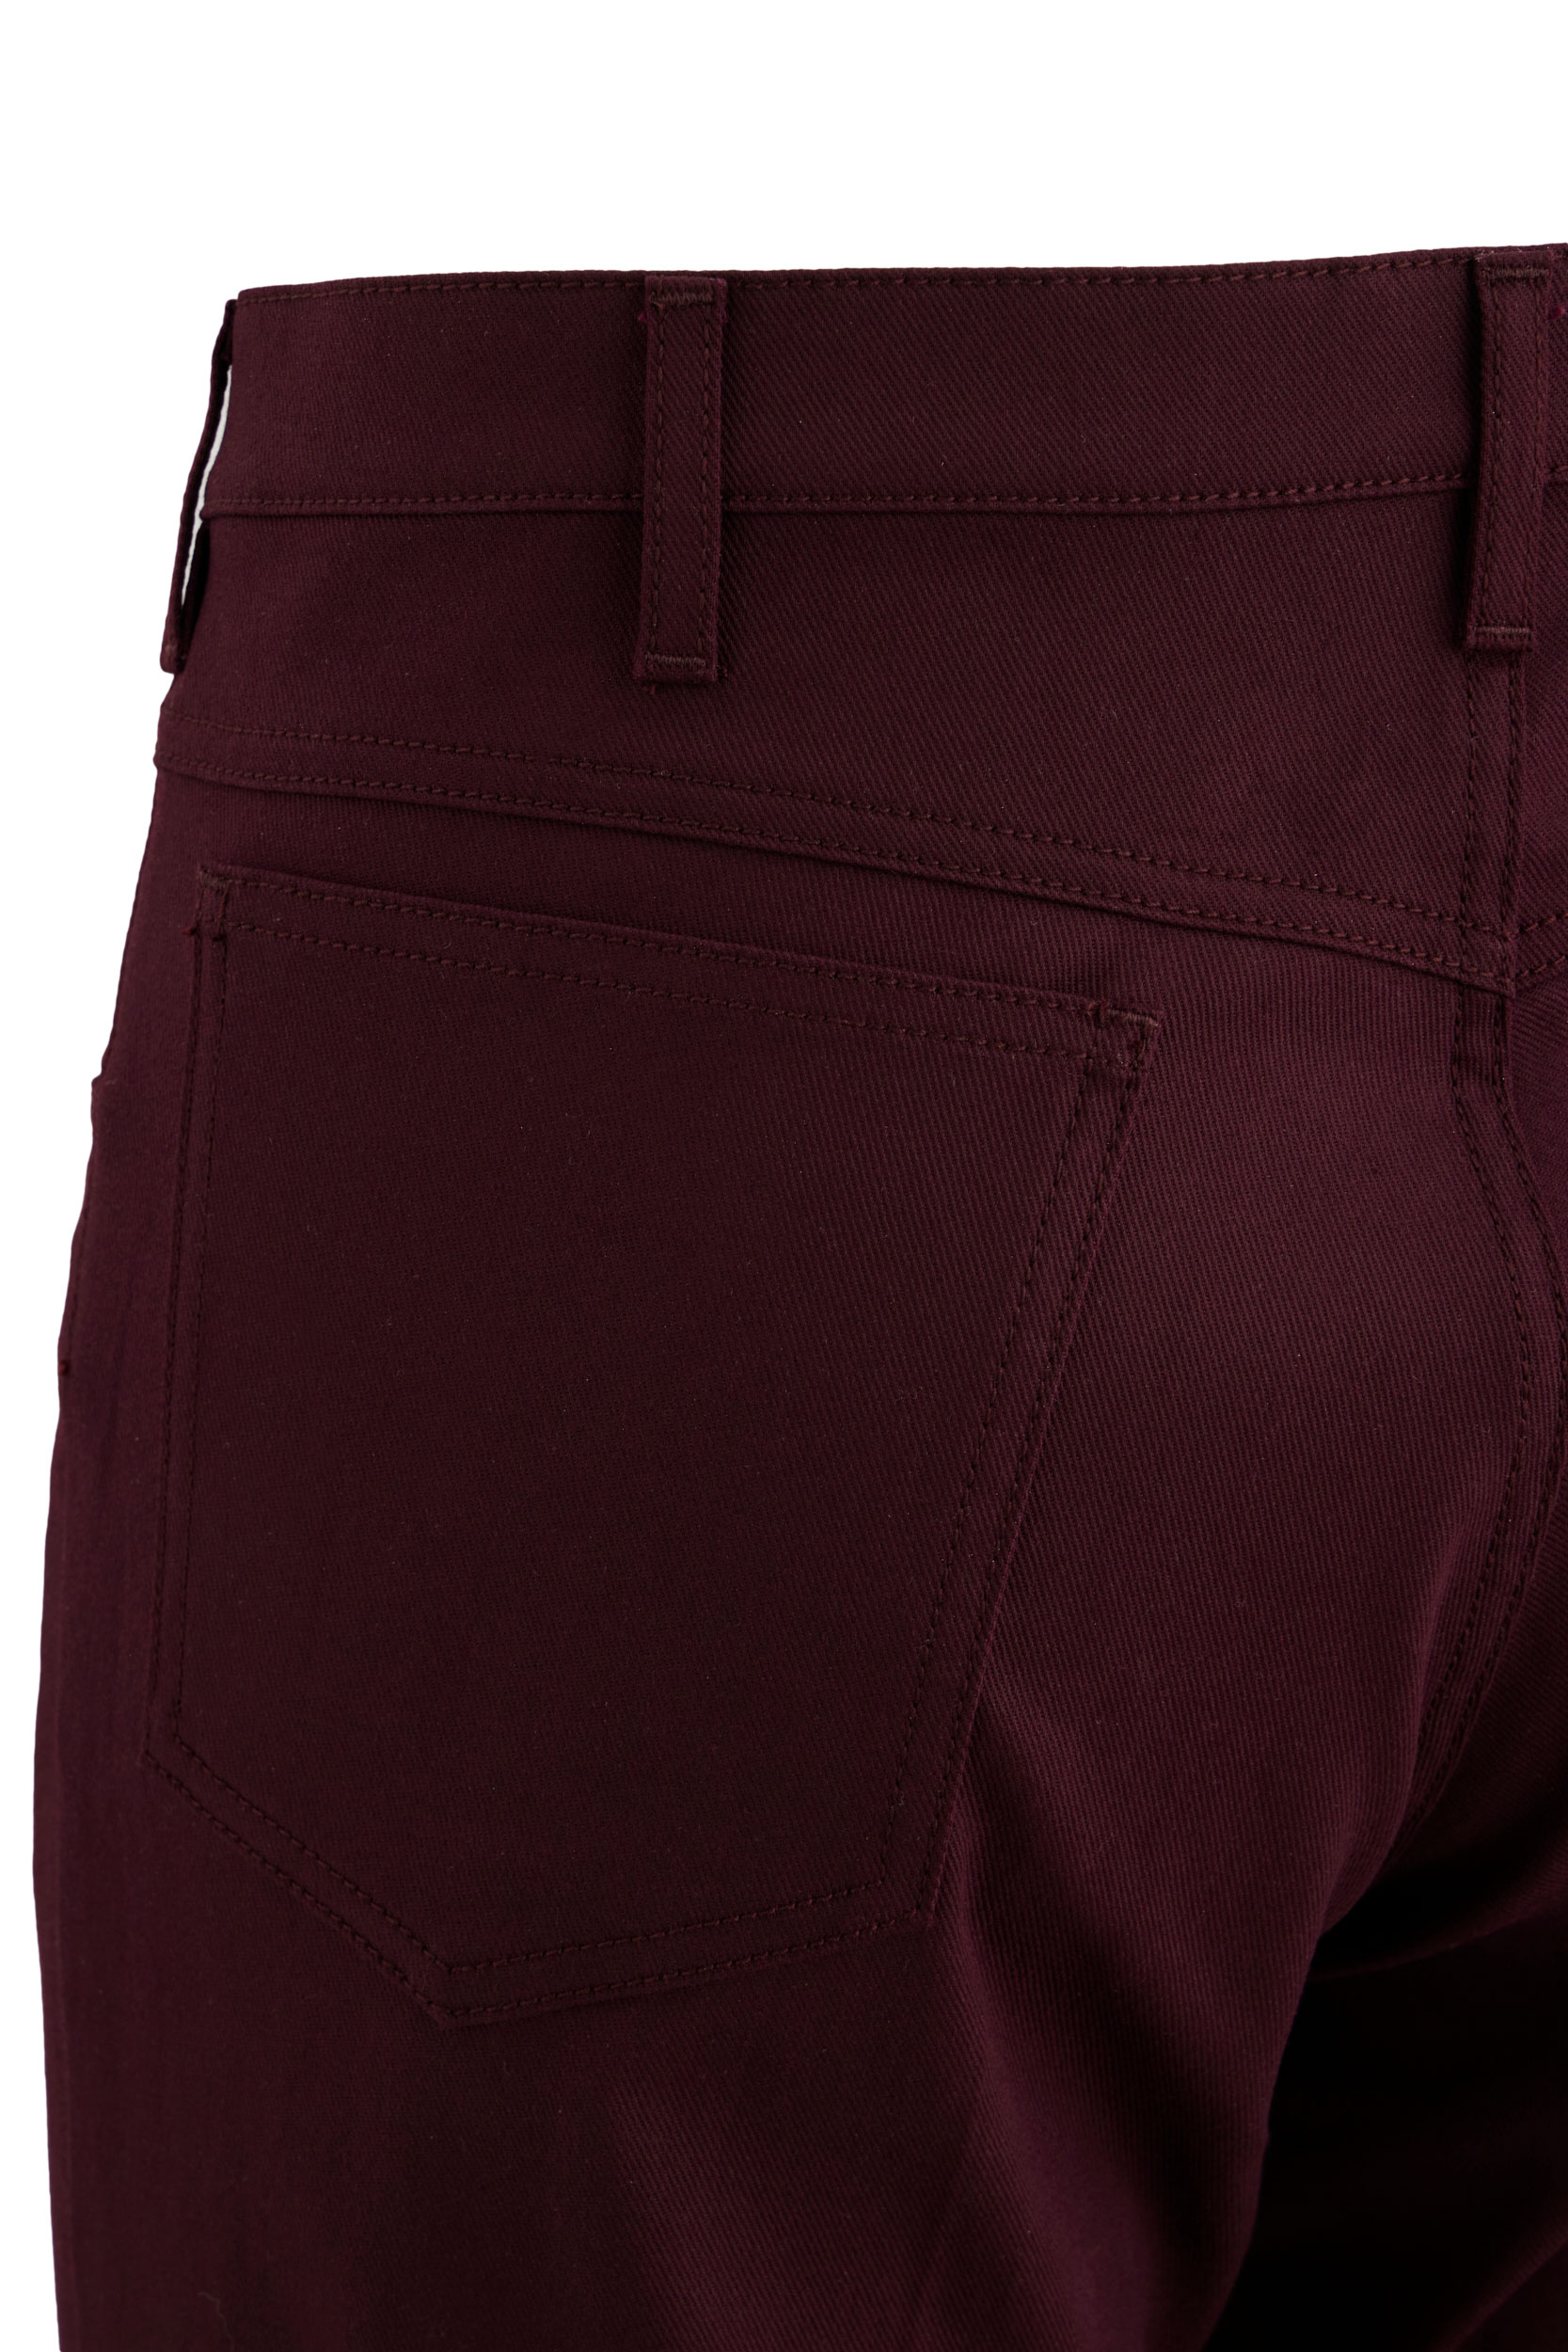 Paul Smith - Burgundy Slim-Fit Wool and Cashmere-Blend Suit Trousers -  Burgundy Paul Smith